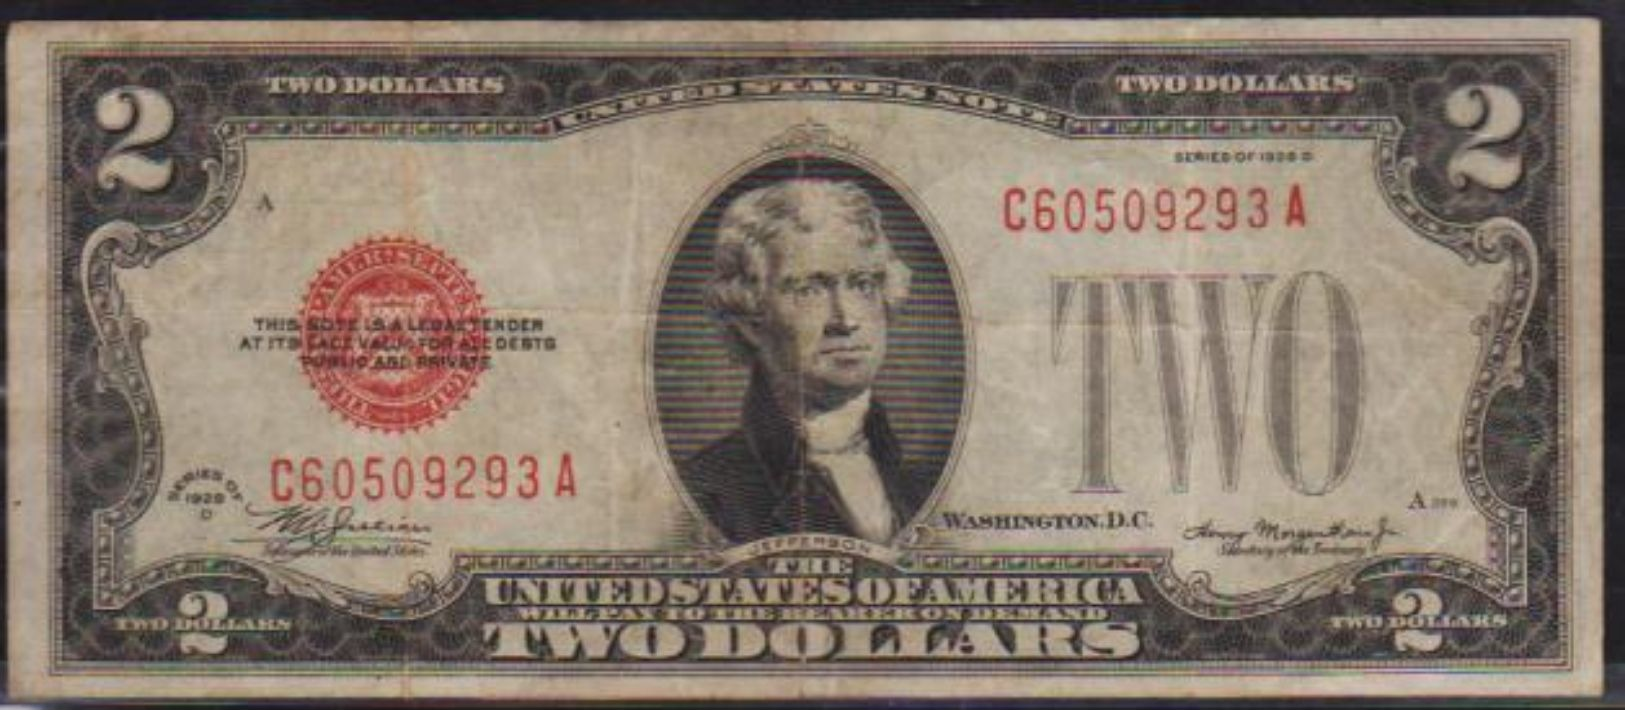 USD 1928D RED SEAL $2. UNITED STATES NOTE. LN A COLLECTIBLE GRADE.. - United States Notes (1928-1953)